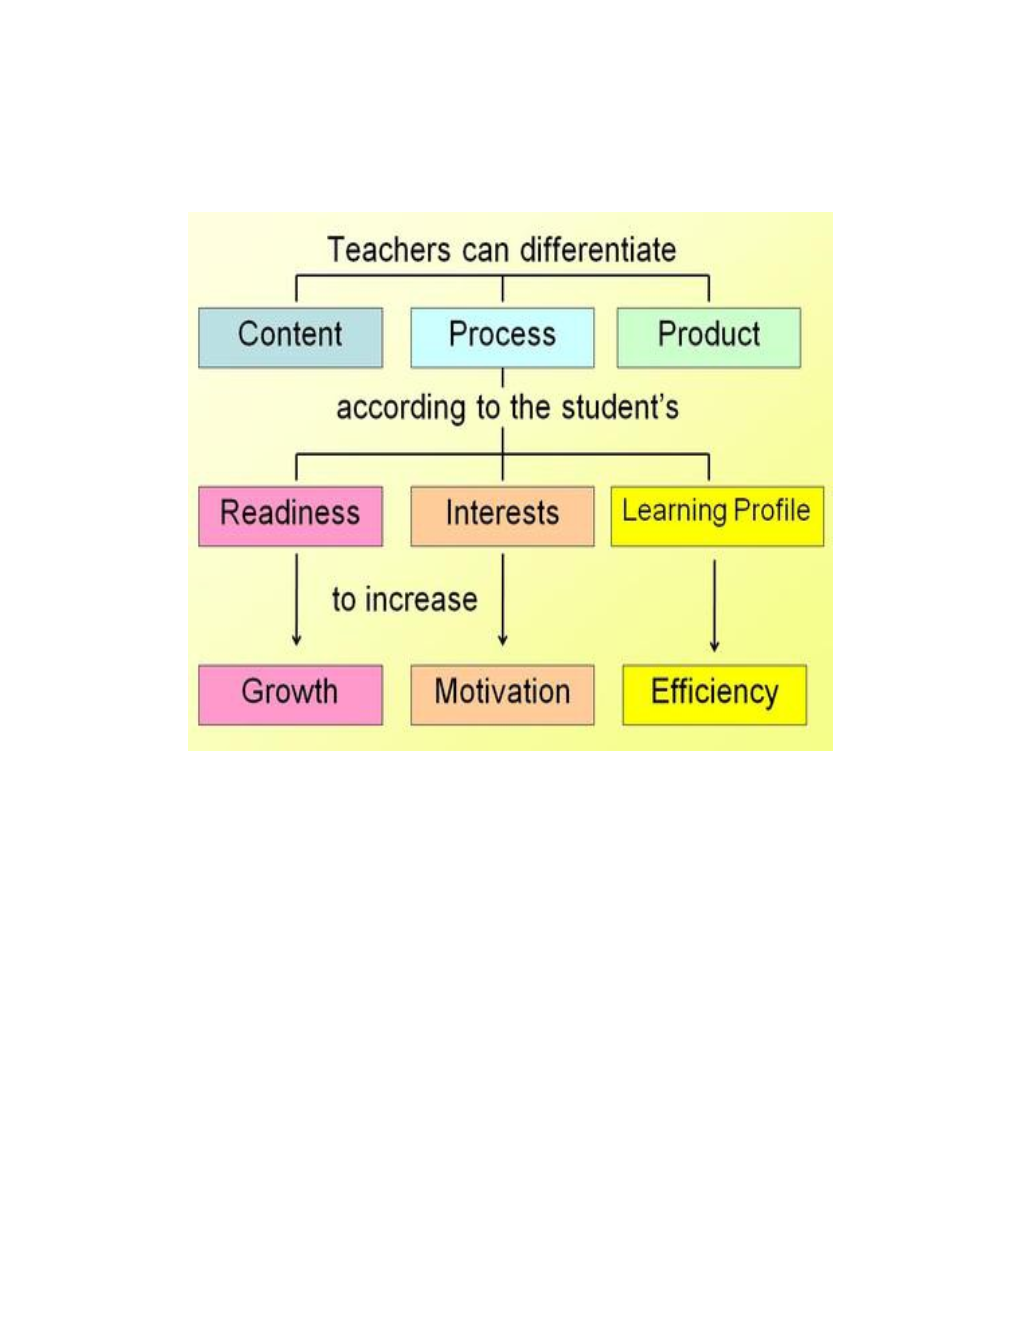 Content During Your Pre-Assessment to Gather Information About Your Learners, You Discover